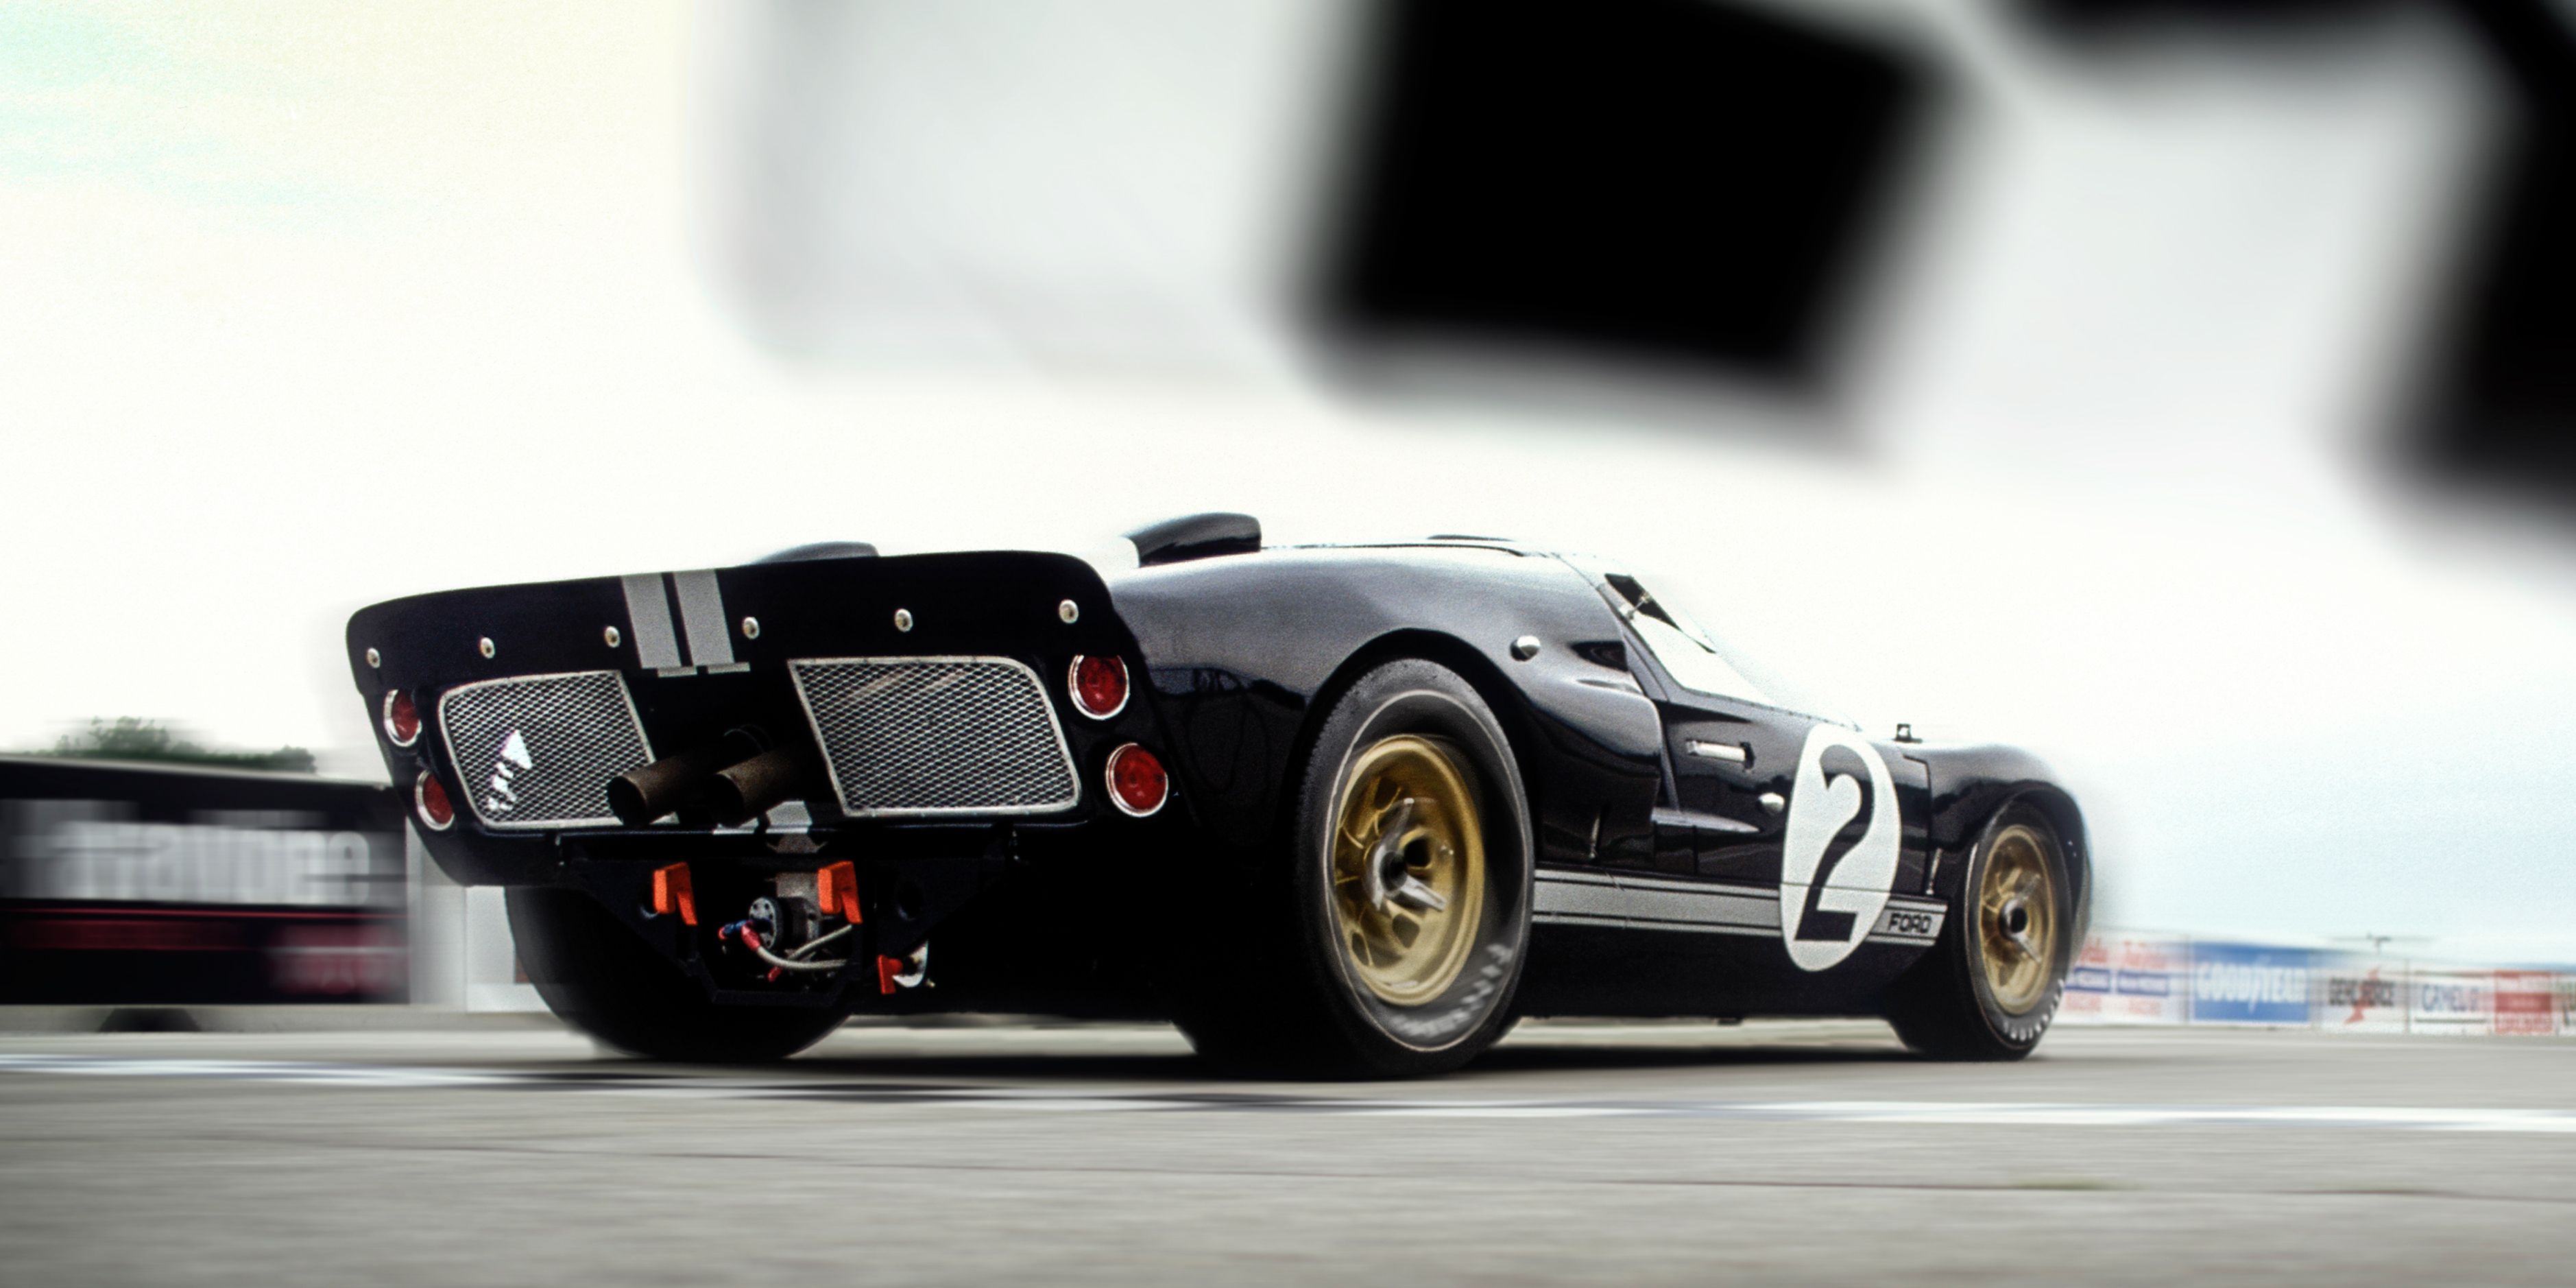 The Life And Times Of The 1966 Le Mans Winning Ford Gt40 Mk Ii